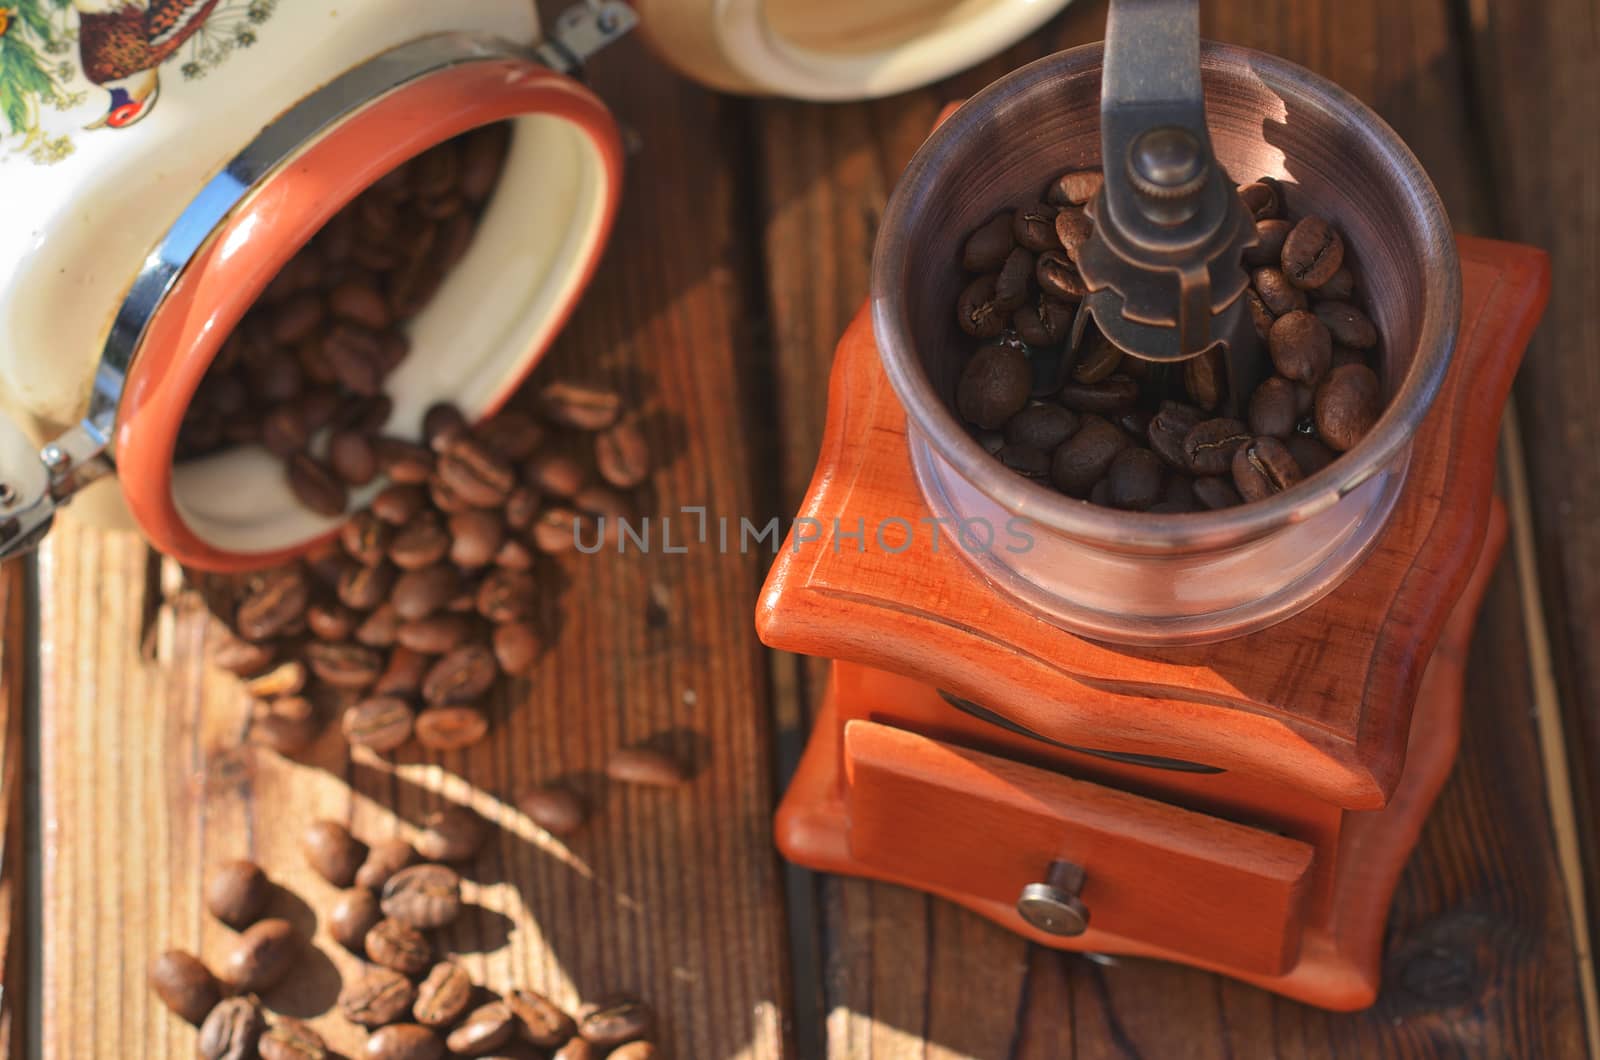 A handmade coffee grinder with coffee beans, coffee roasted grains poured out of the cans